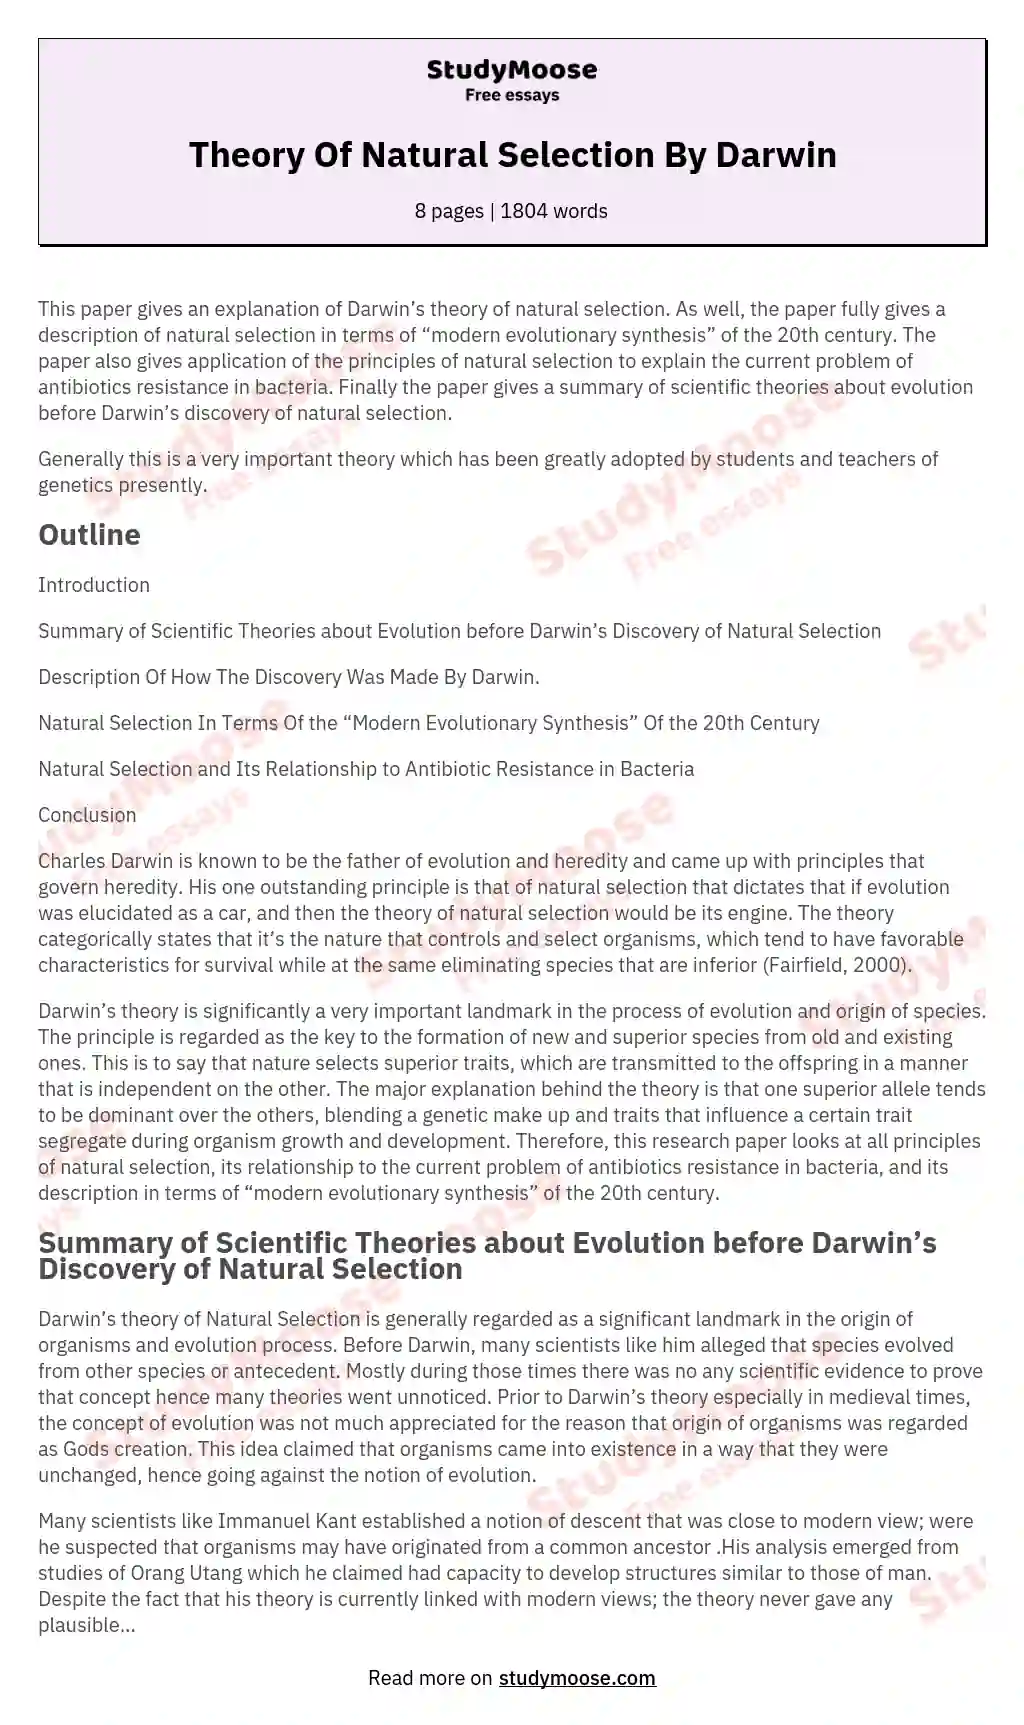 Theory Of Natural Selection By Darwin essay